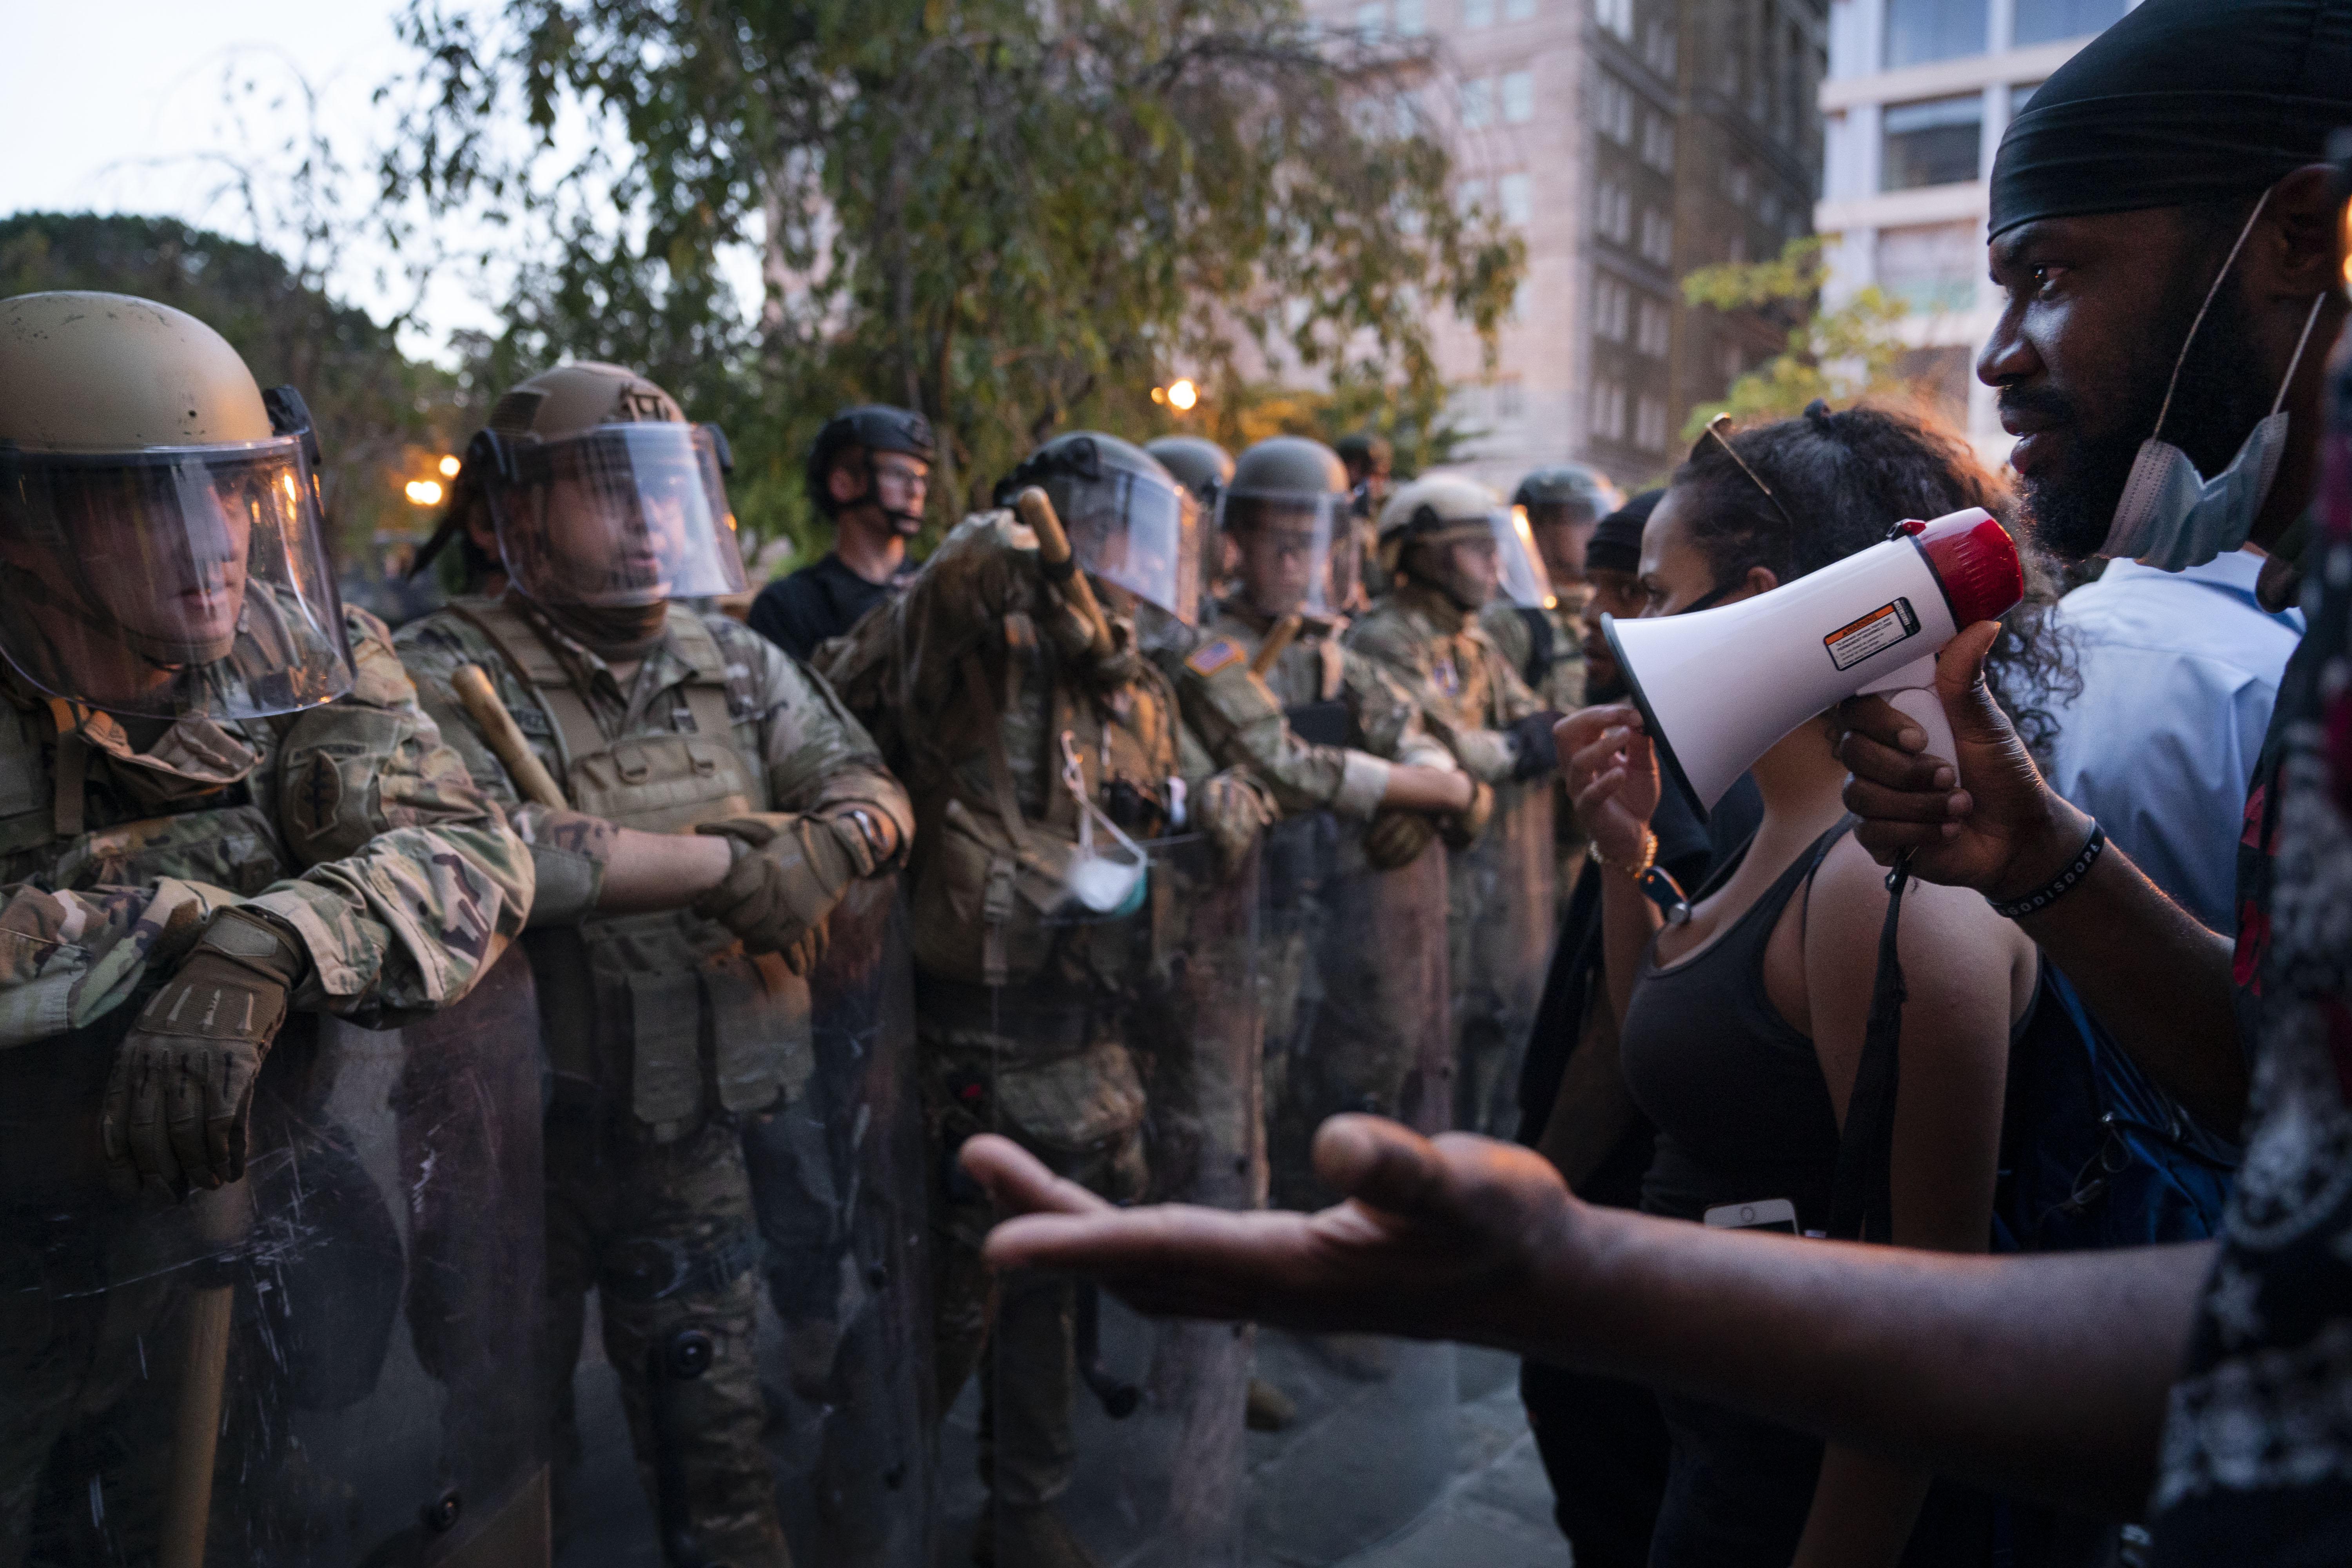 A protester with a bullhorn talks with a line of armed militarized police in camo and riot gear.